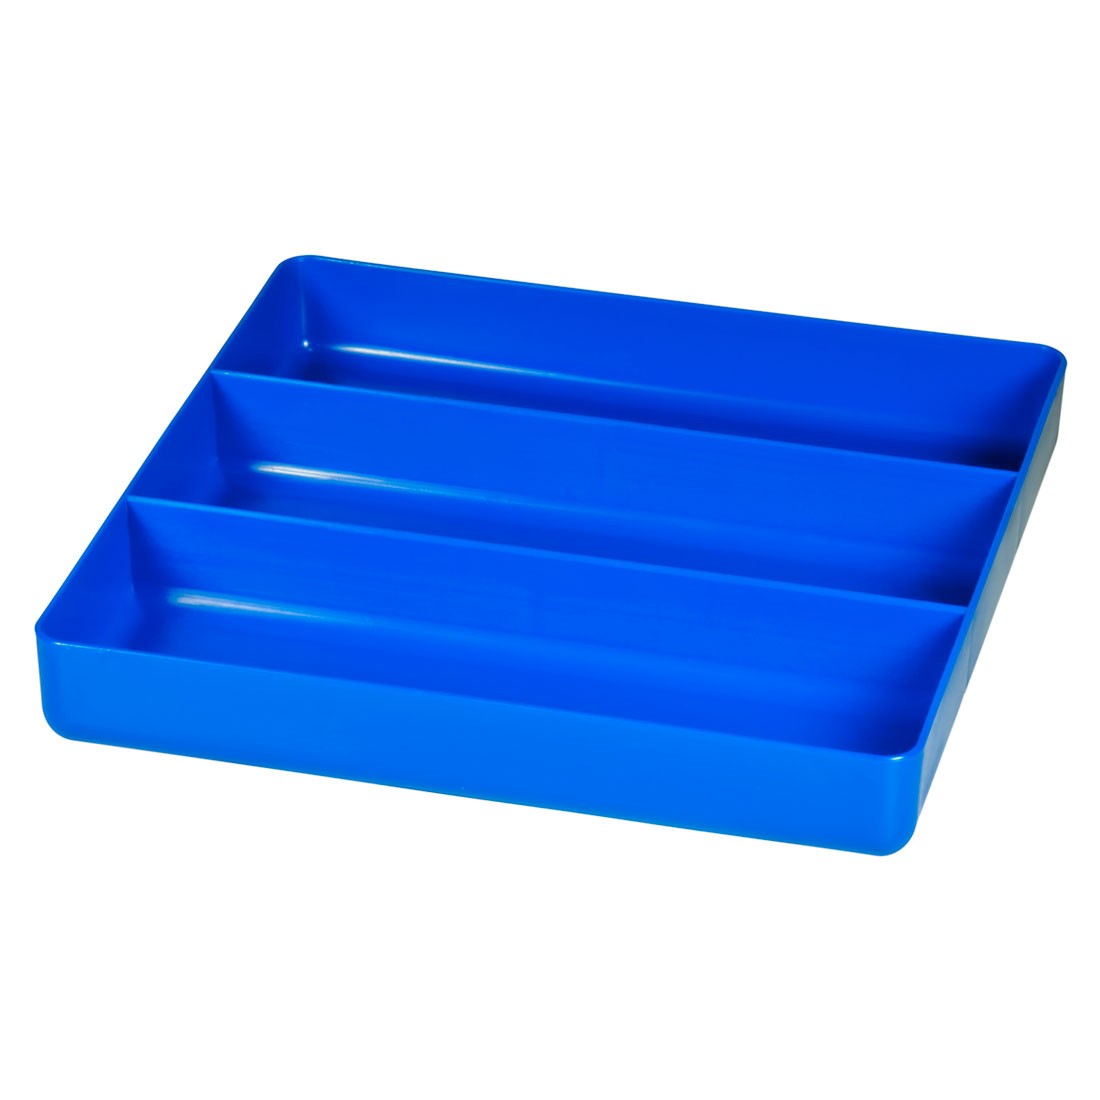 Ernst Manufacturing 10 Compartment Organizer Tray (Blue) (11x16) -  Performance Bicycle